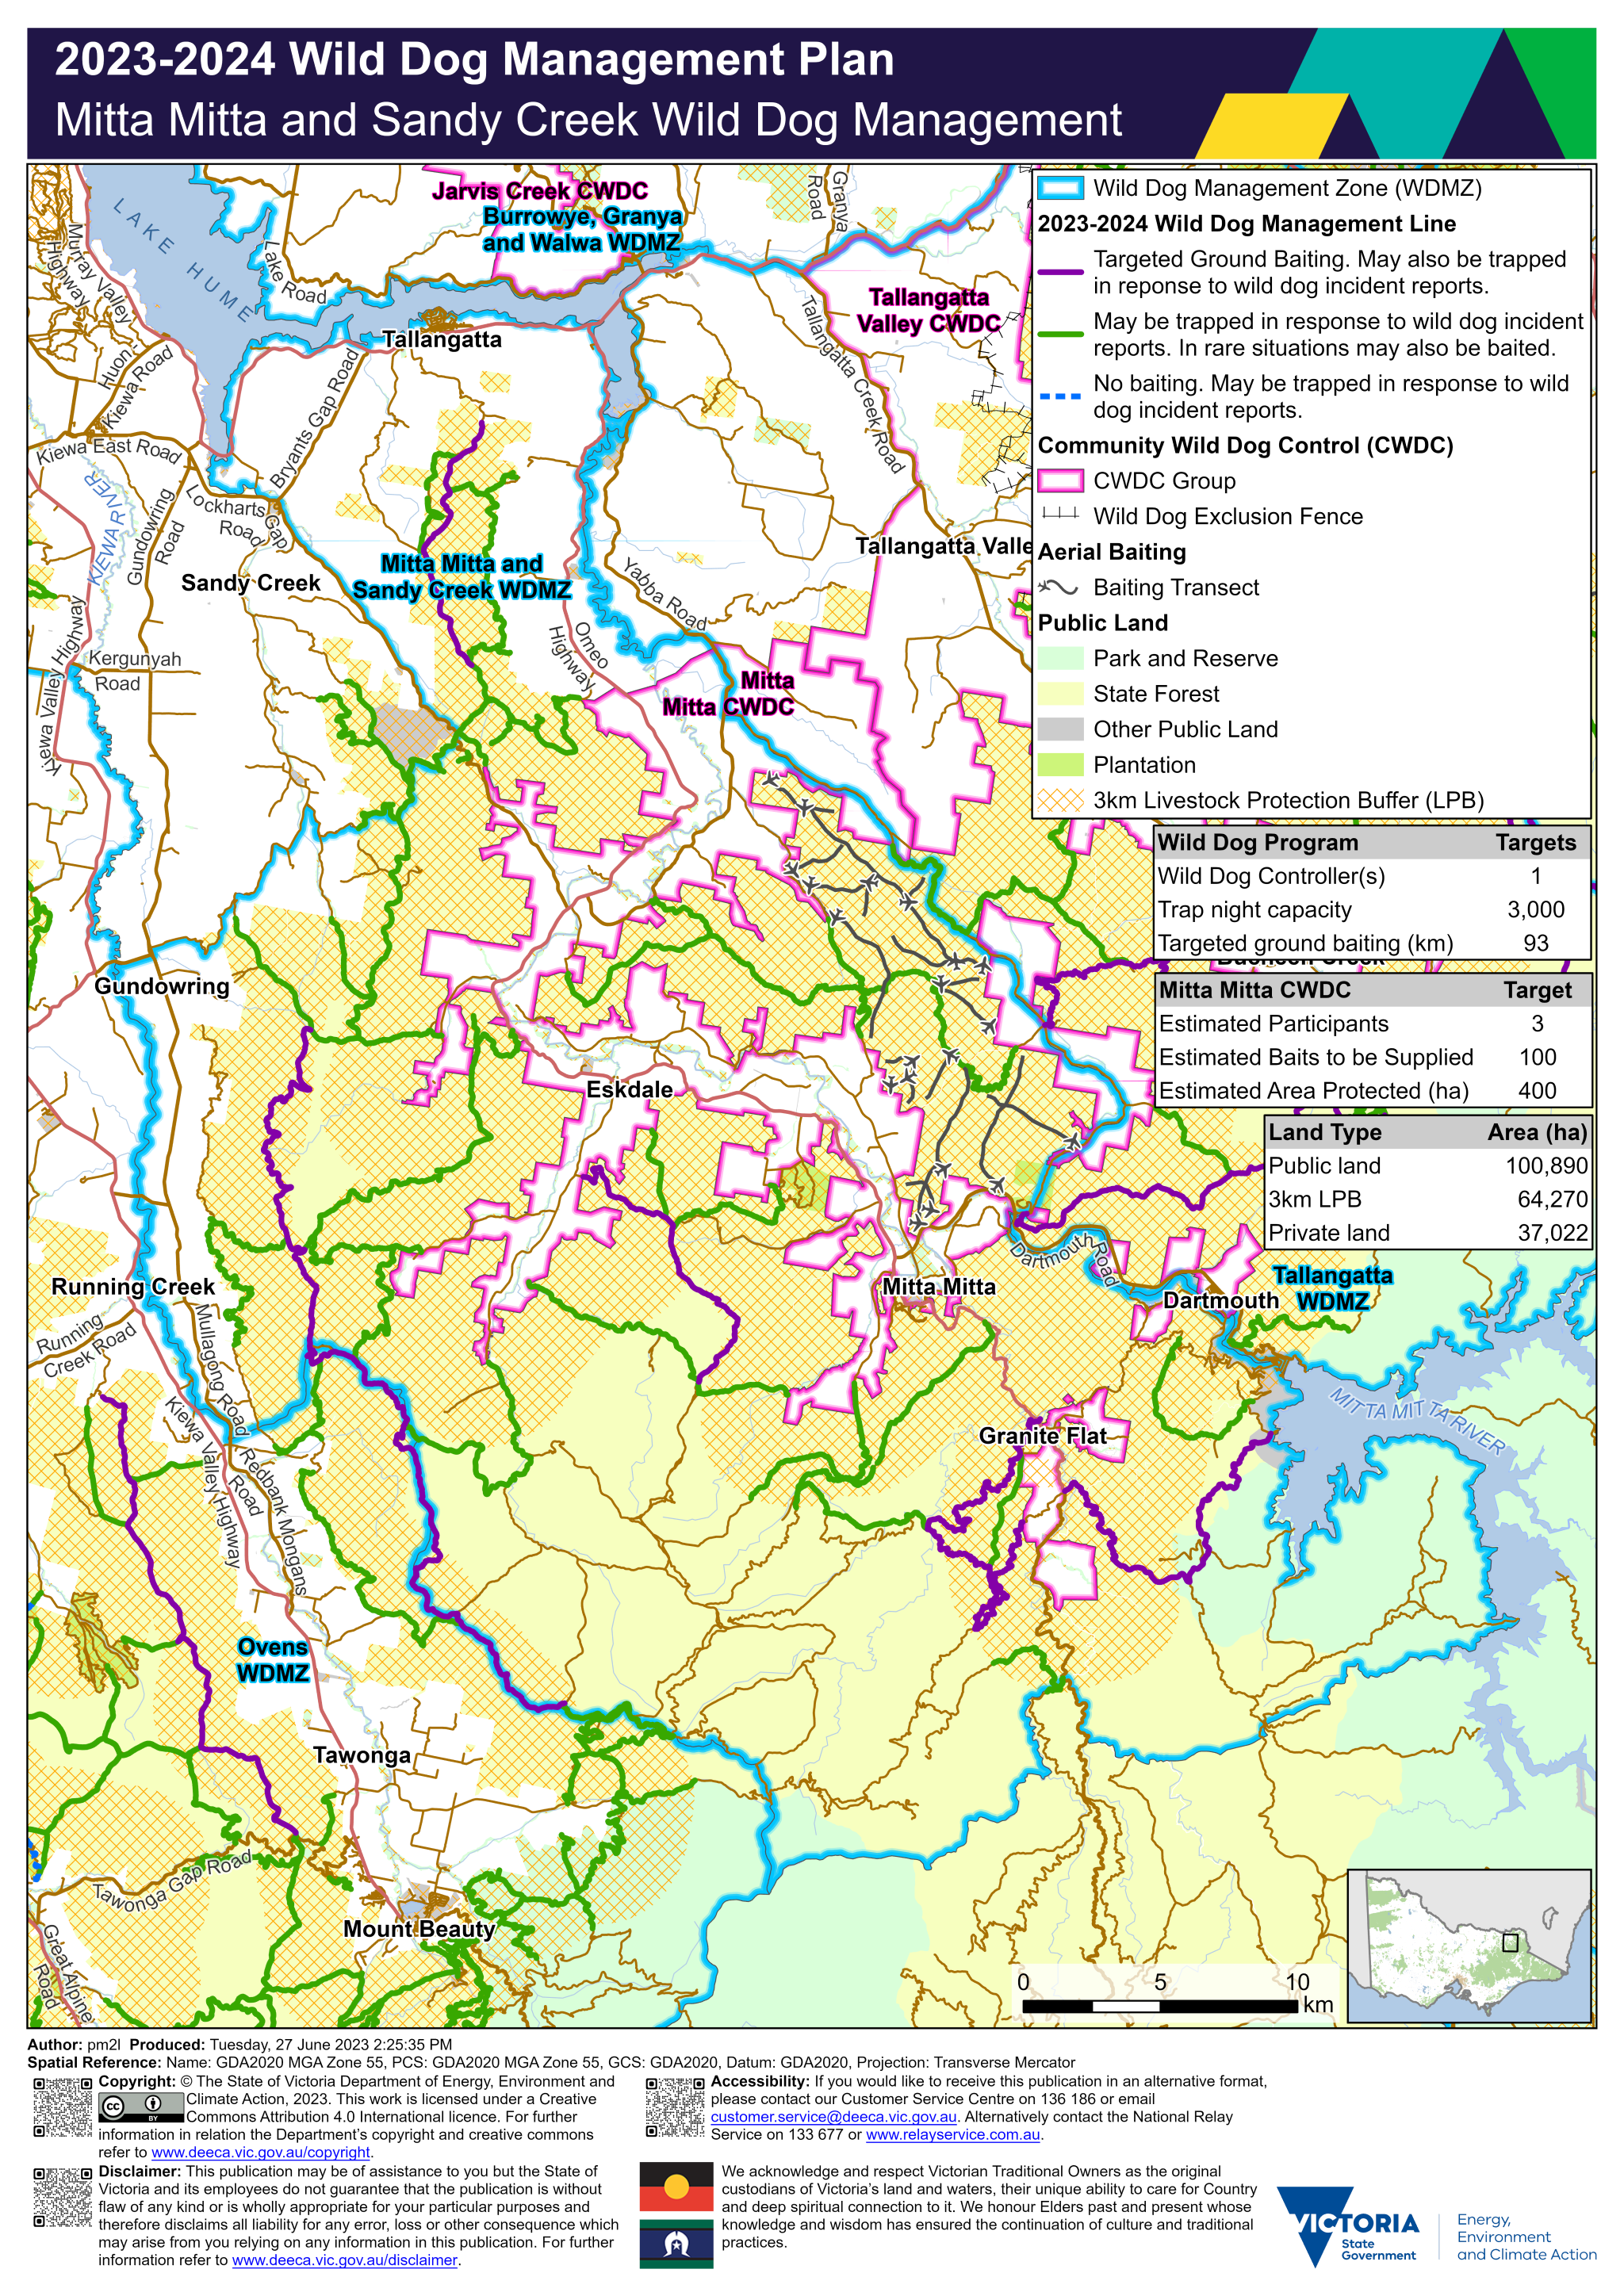 A detailed map of the Mitta Mitta and Sandy Creek regions showing the Mitta Mitta and Sandy Creek wild dog management zone along with Trapping and Priority 1 and Priority 2 ground baiting transects. Further information below image.